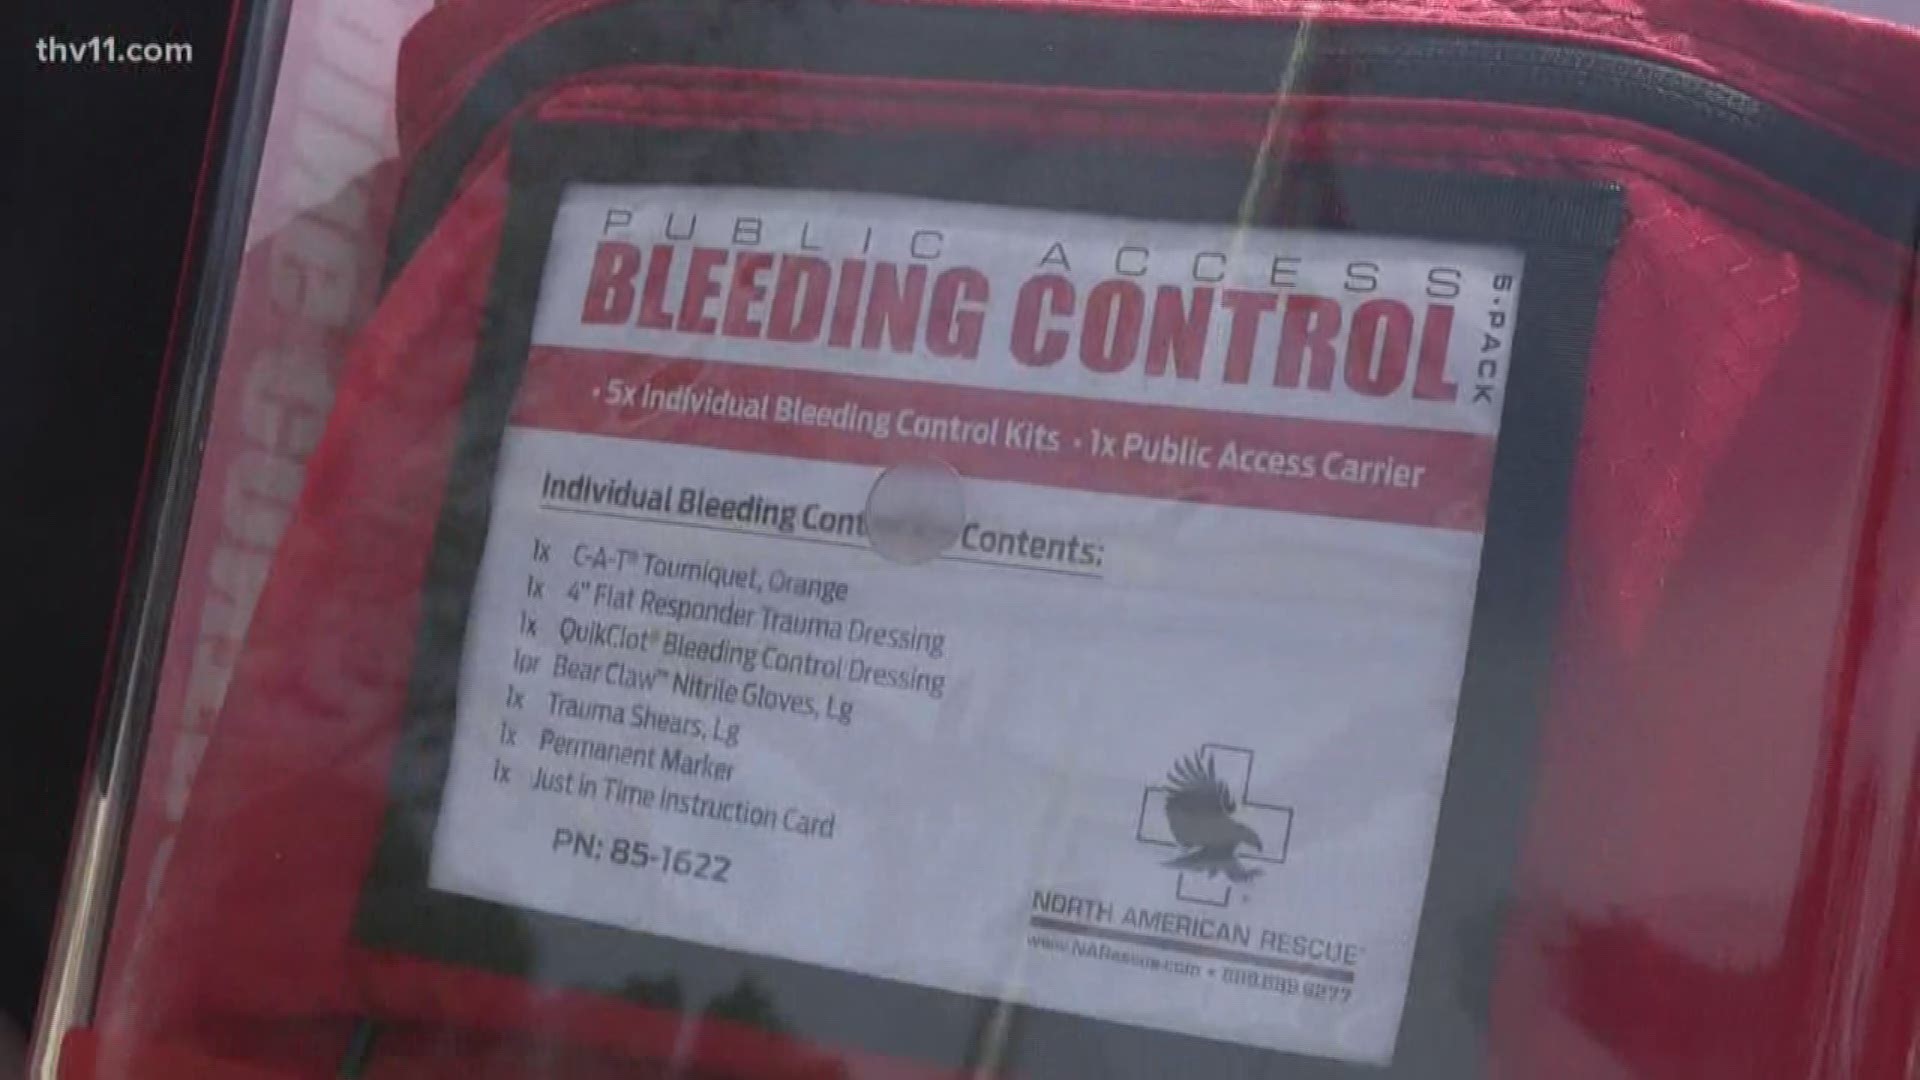 Bleeding control kits can help save lives. They have been distributed to 300 Arkansas schools so far.